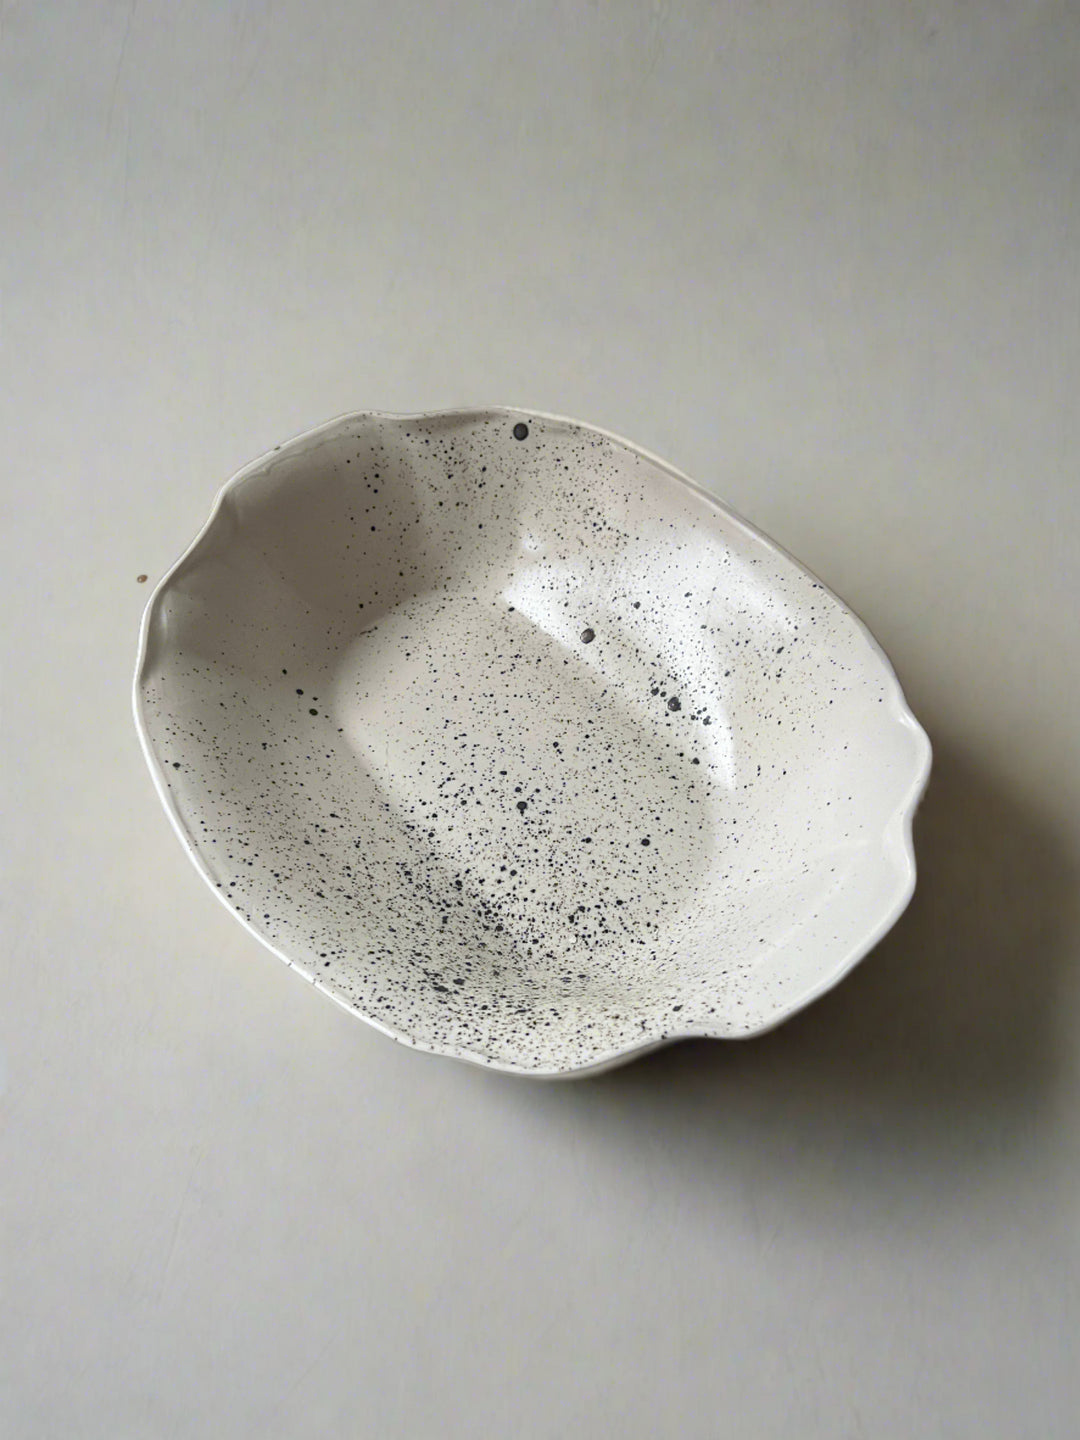 Formale Bowl in Speckle